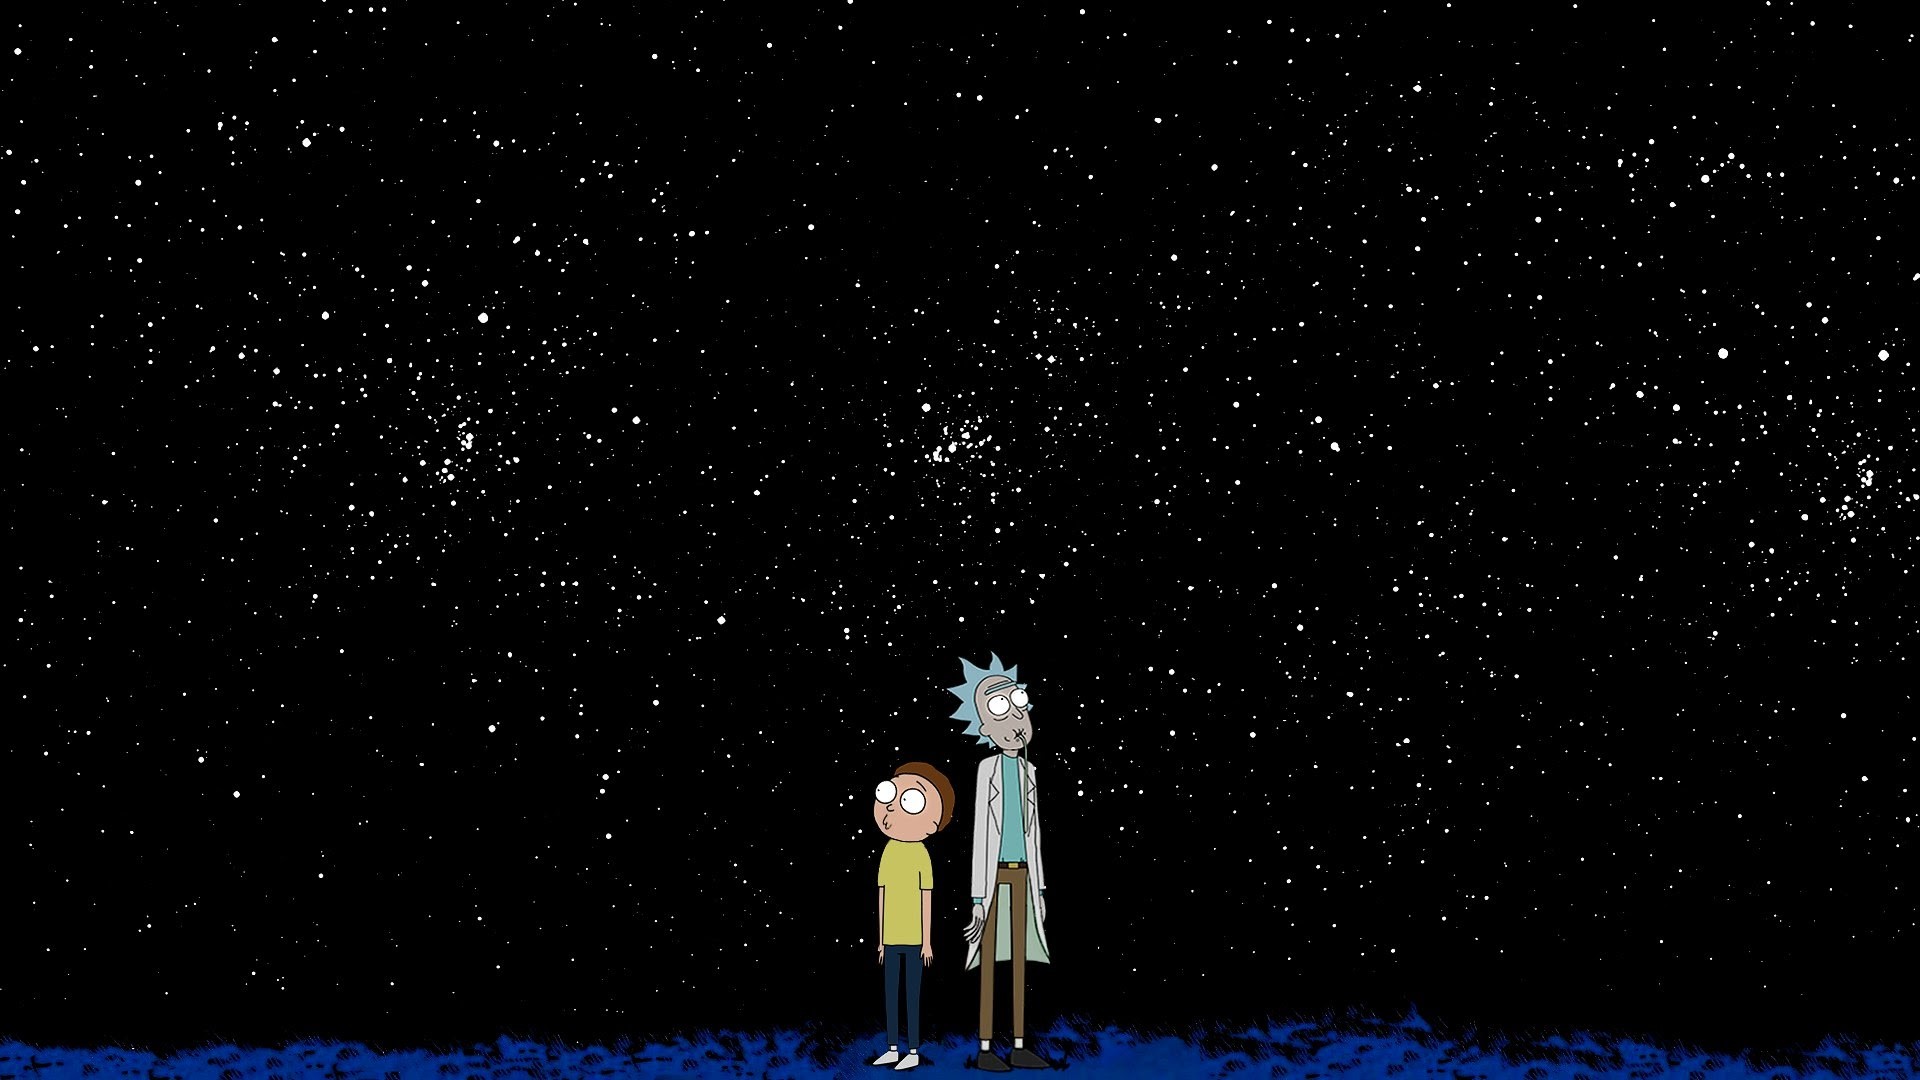 Best Rick and Morty Wallpaper with image resolution 1920x1080 pixel. You can use this wallpaper as background for your desktop Computer Screensavers, Android or iPhone smartphones